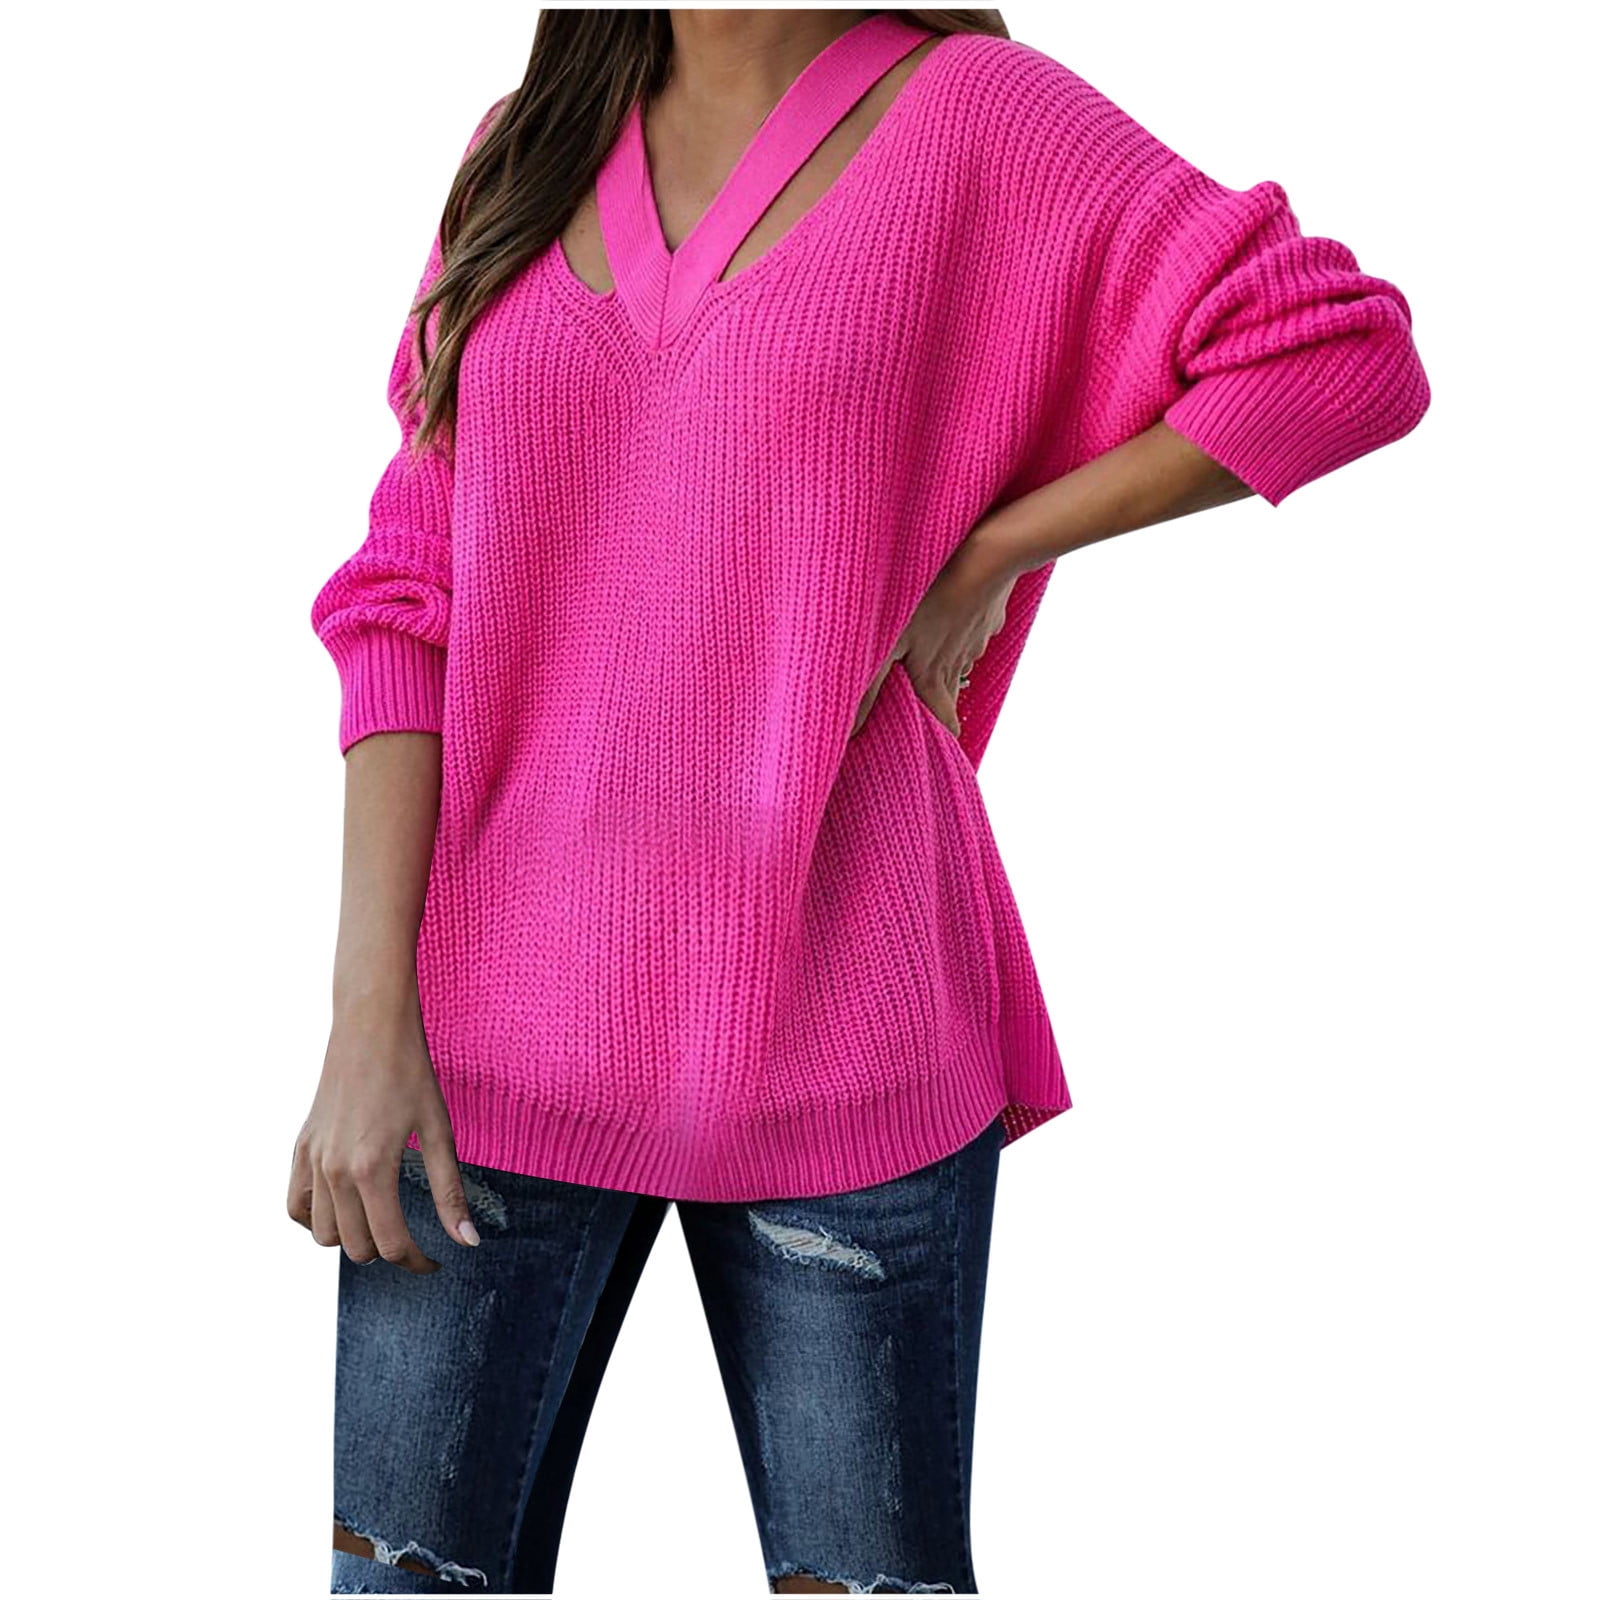  Womens Summer V Neck Long Sleeve Tops Fashion Under 5 Dollar   Clearance pallets for Sale Under 20 add in Items Under   Returns for Sale Pallet Preppy Stuff Under 5